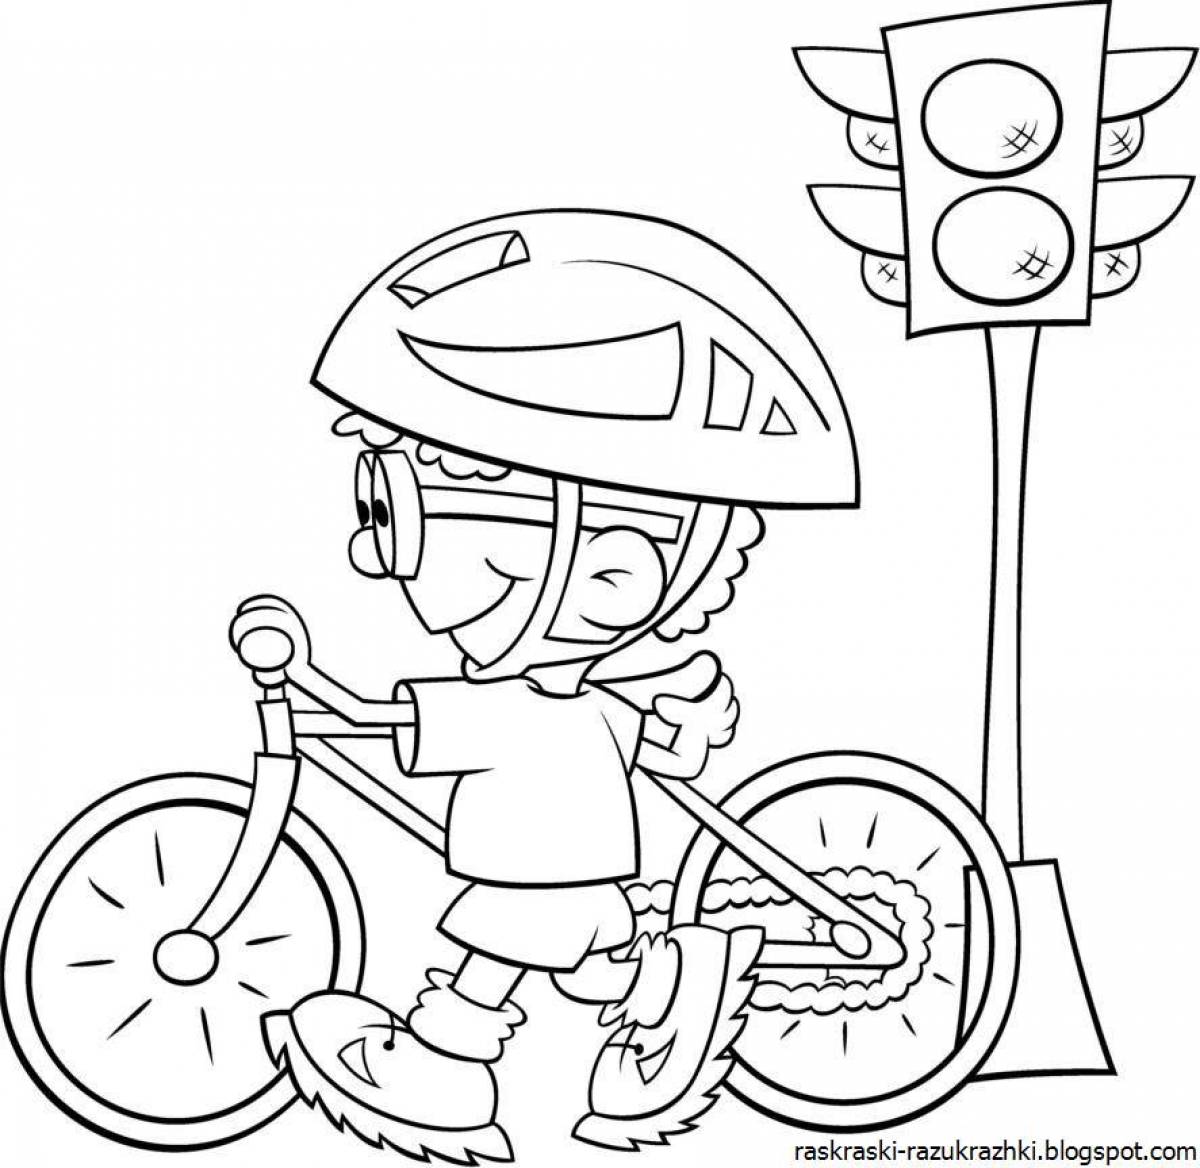 Playful traffic rules coloring page